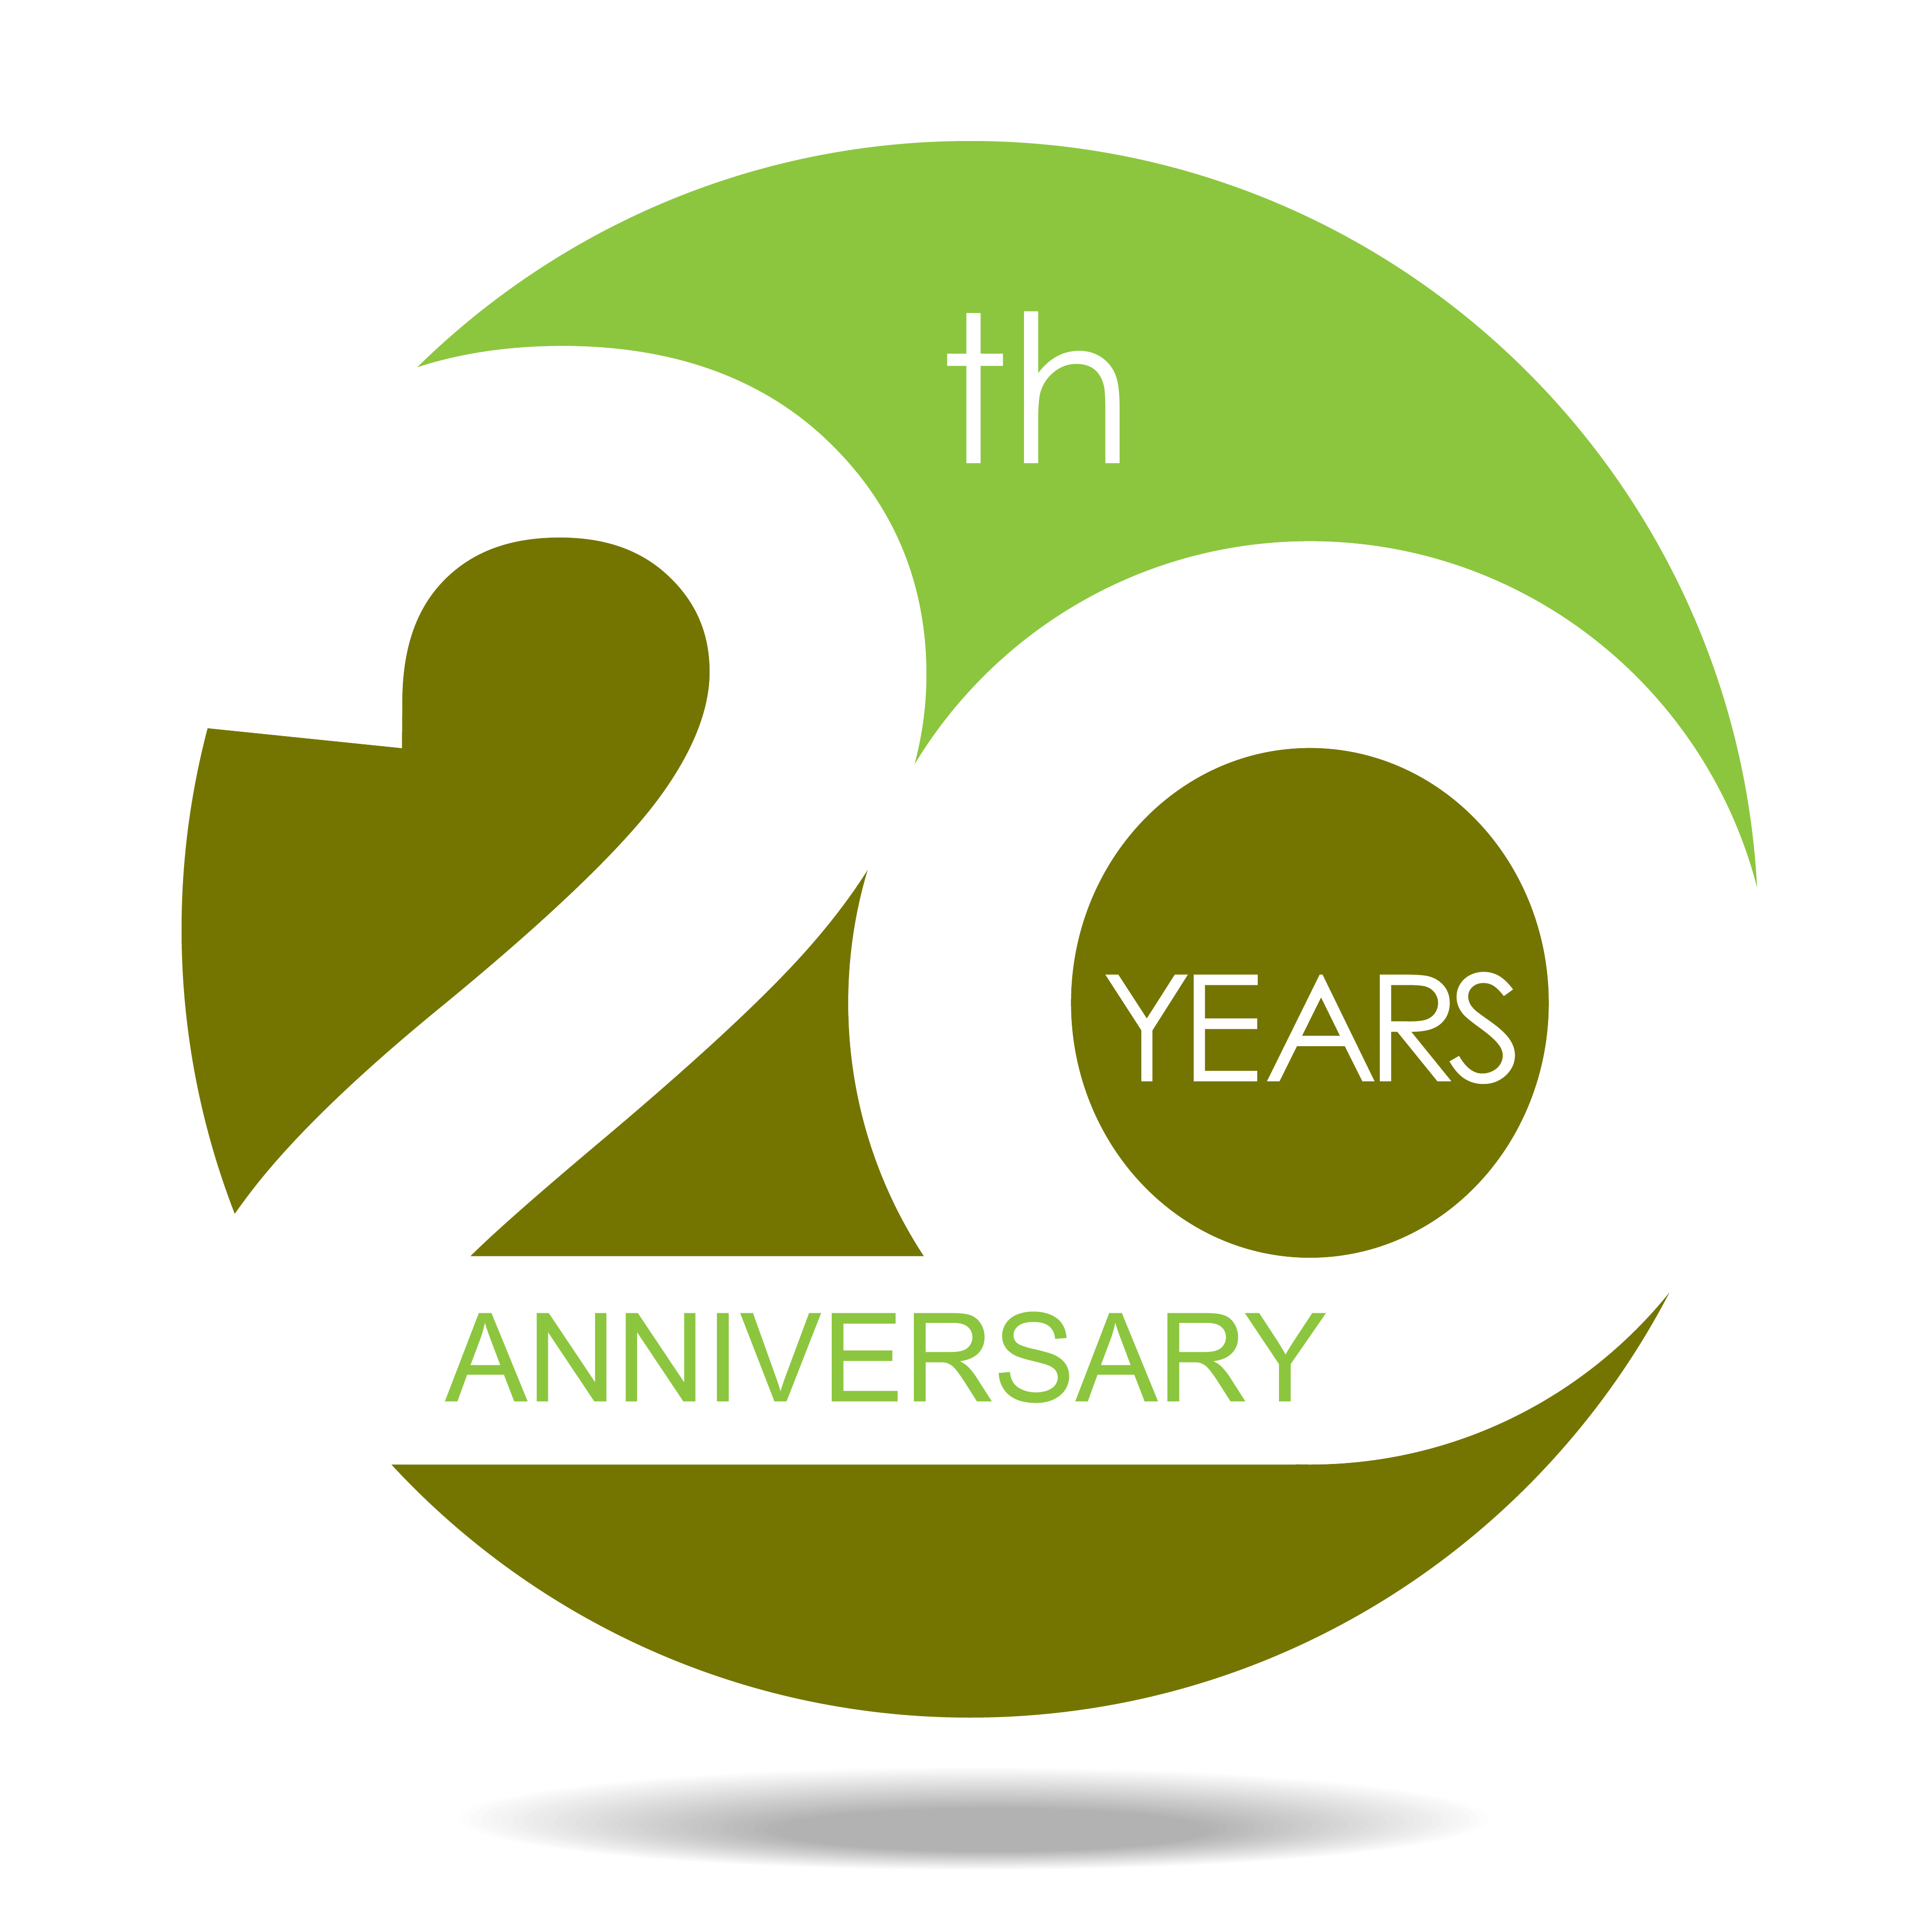 20 year anniversary - Download Free Vectors, Clipart ...